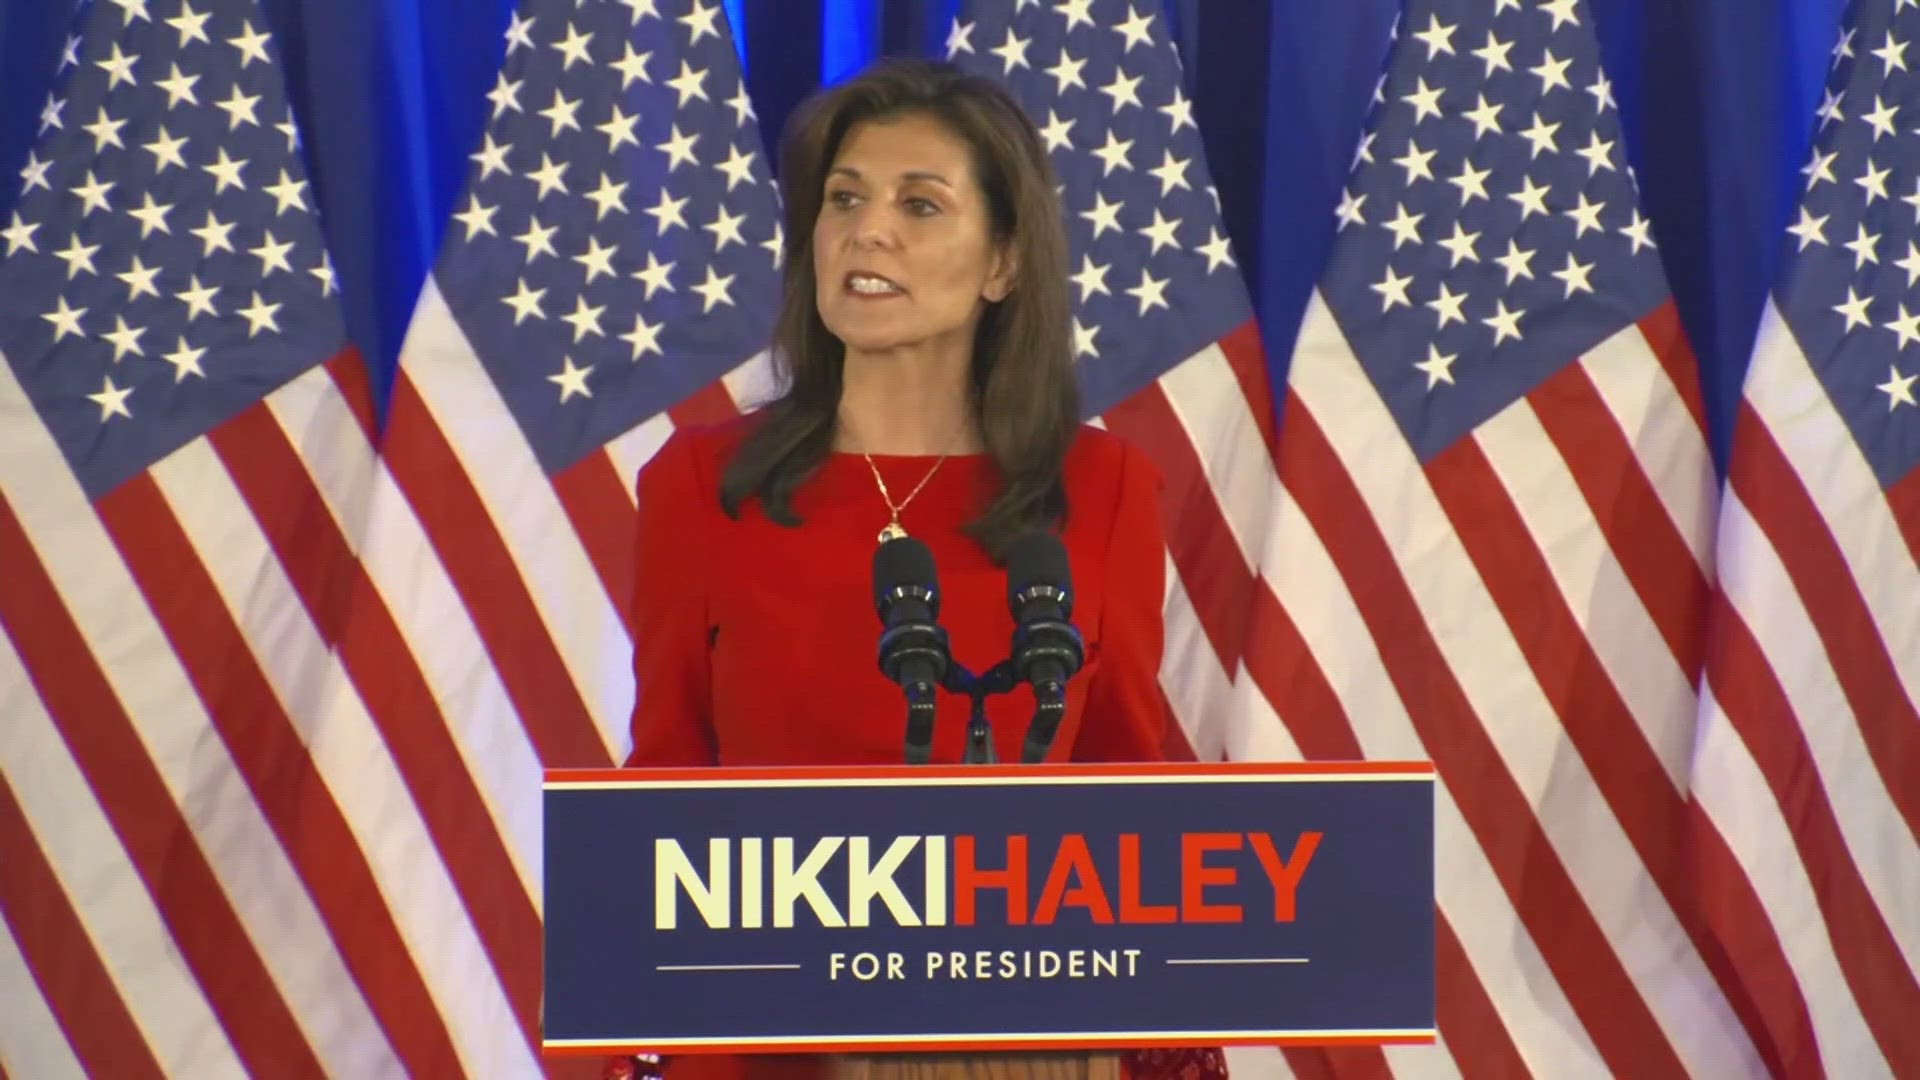 Haley said that she has "no regrets" about her campaign for the 2024 GOP presidential nomination.